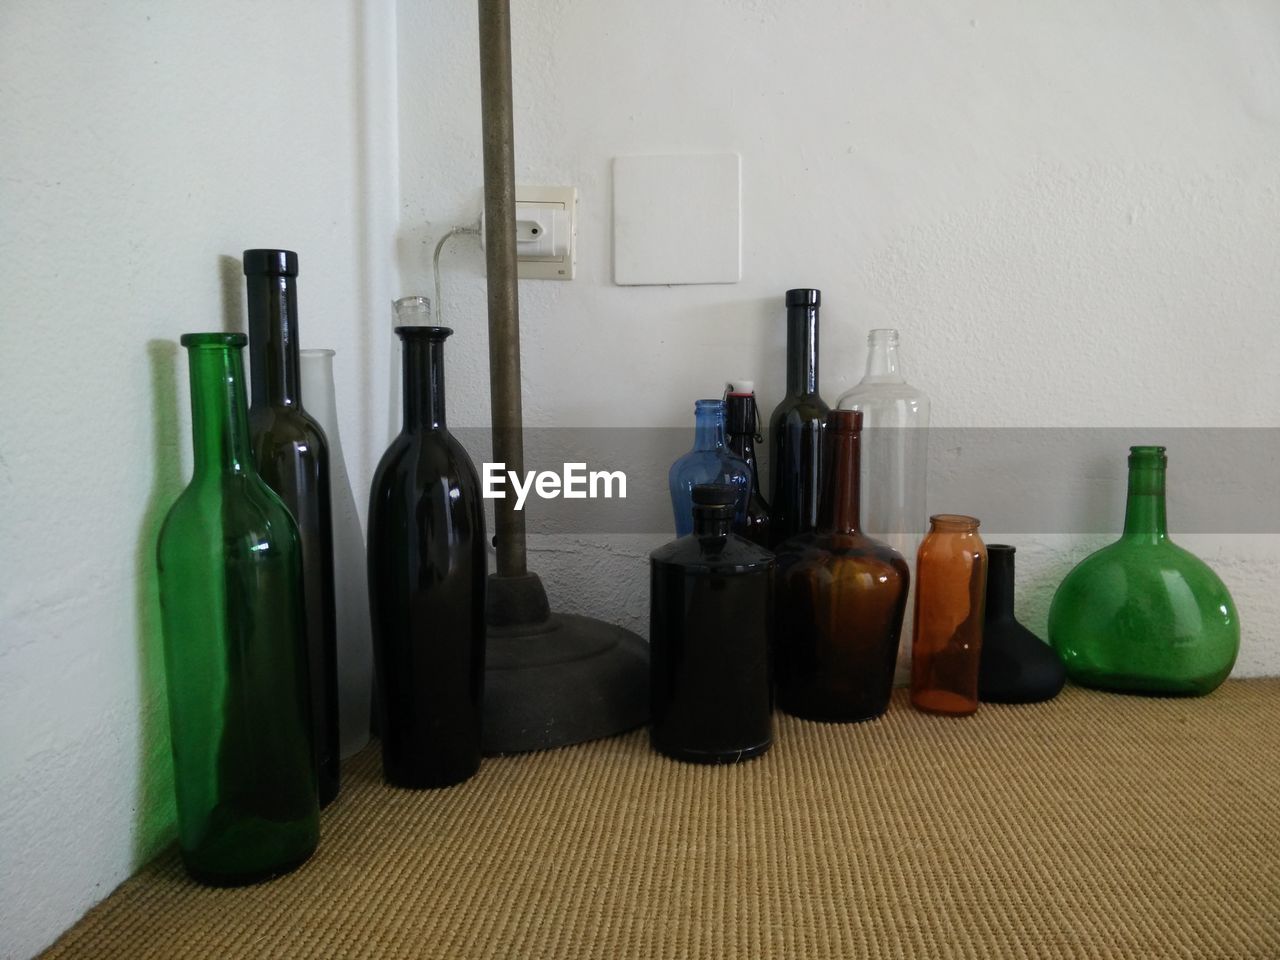 CLOSE-UP OF WINE BOTTLES ON TABLE